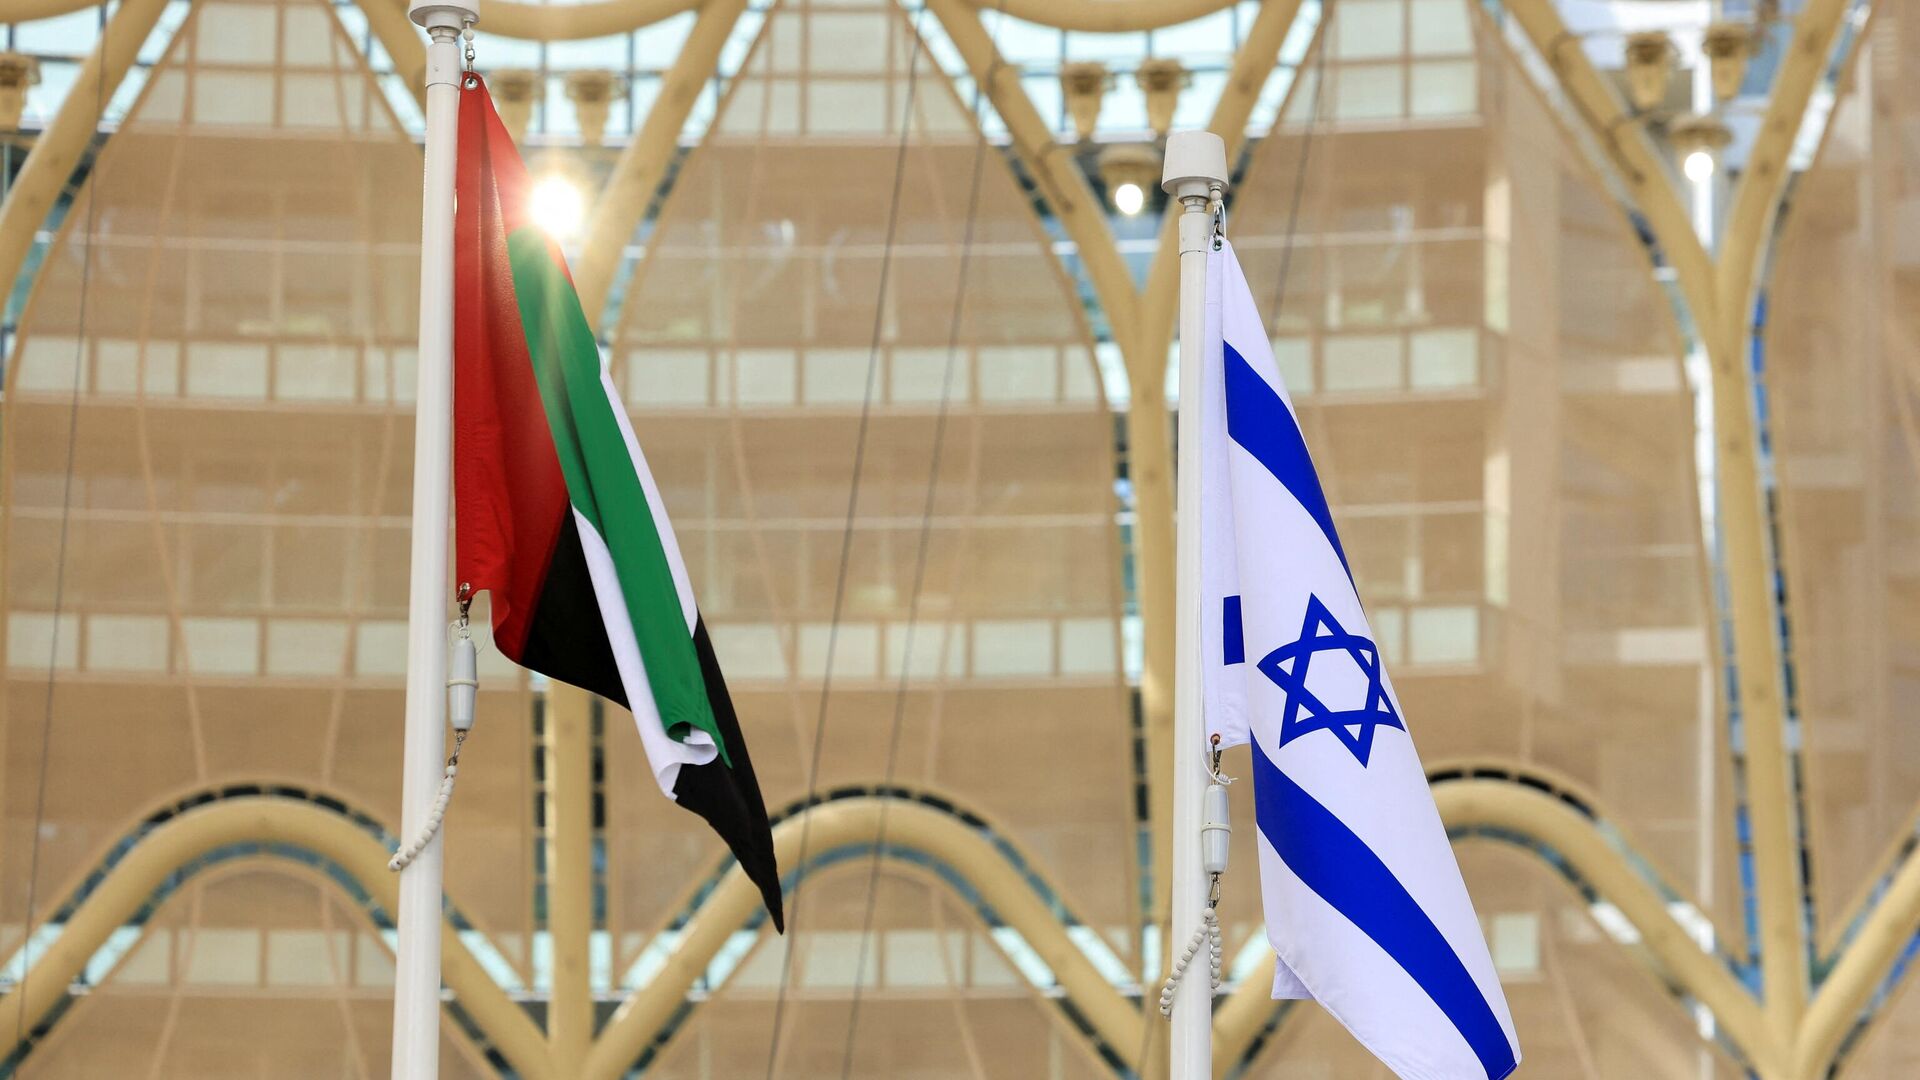 Flags of United Arab Emirates and Israel flutter during Israel's National Day ceremony at Expo 2020 Dubai, in Dubai, United Arab Emirates, January 31, 2022. REUTERS/Christopher Pike/File Photo - Sputnik International, 1920, 26.03.2022